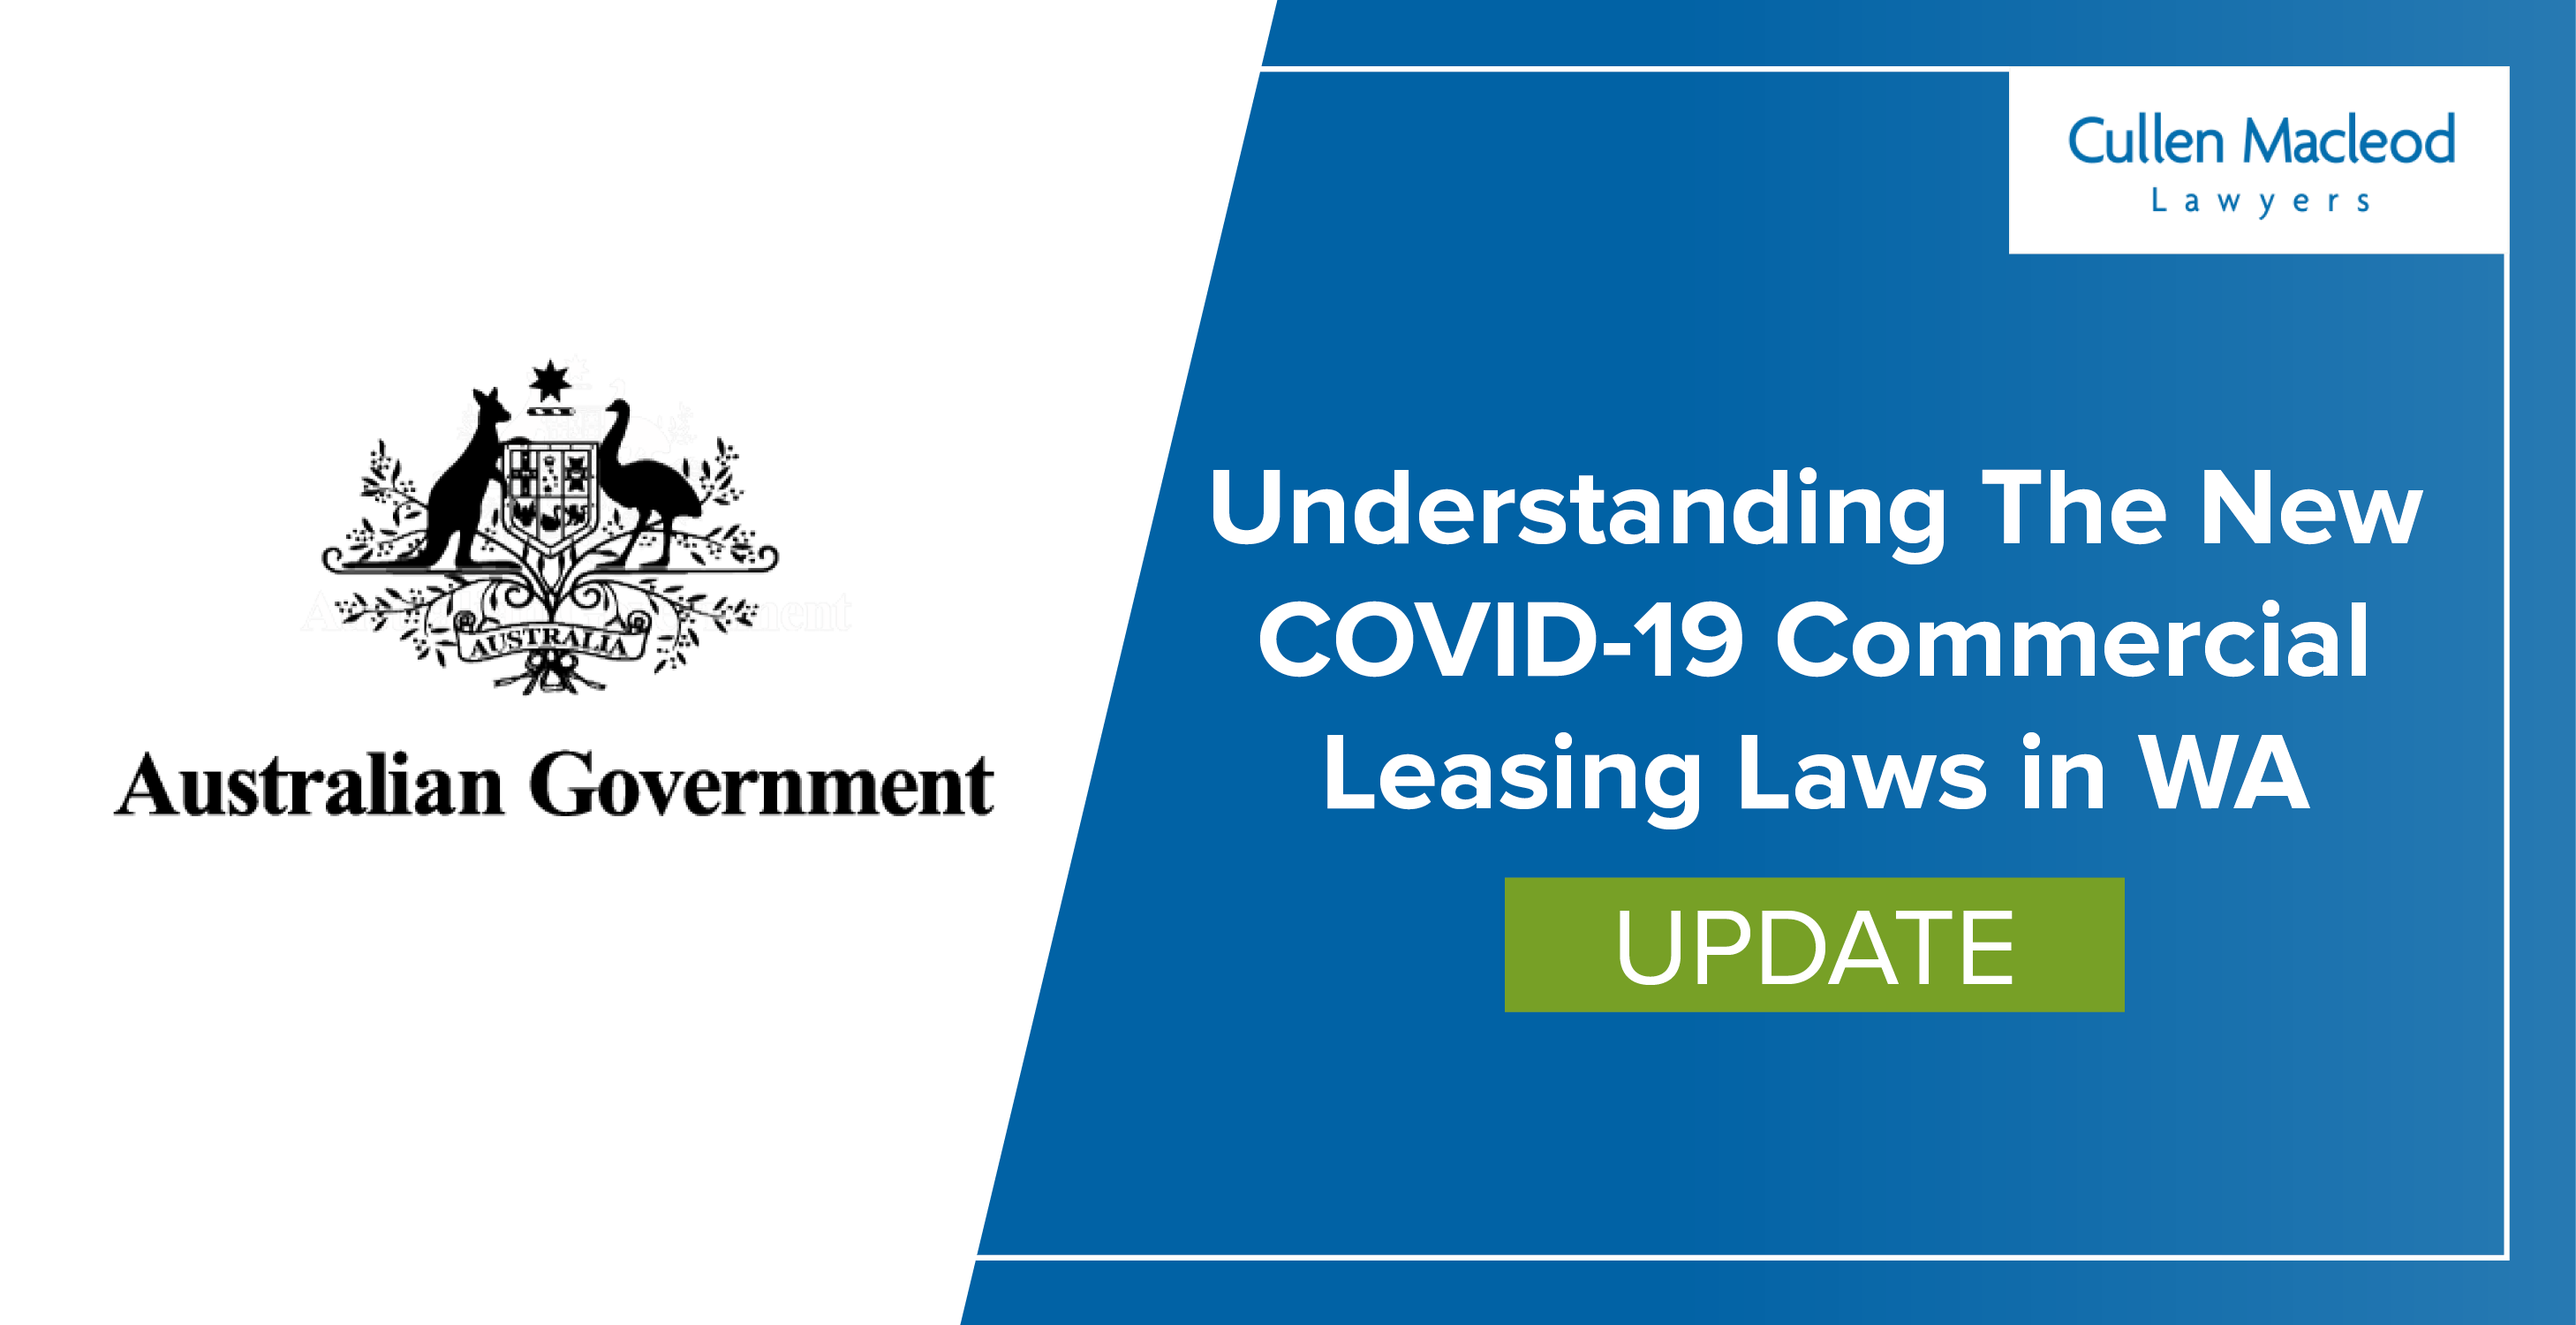 cullen-macleod-blog-feature-image-understanding-the-new-covid-19-commercial-leasing-laws-in-wa